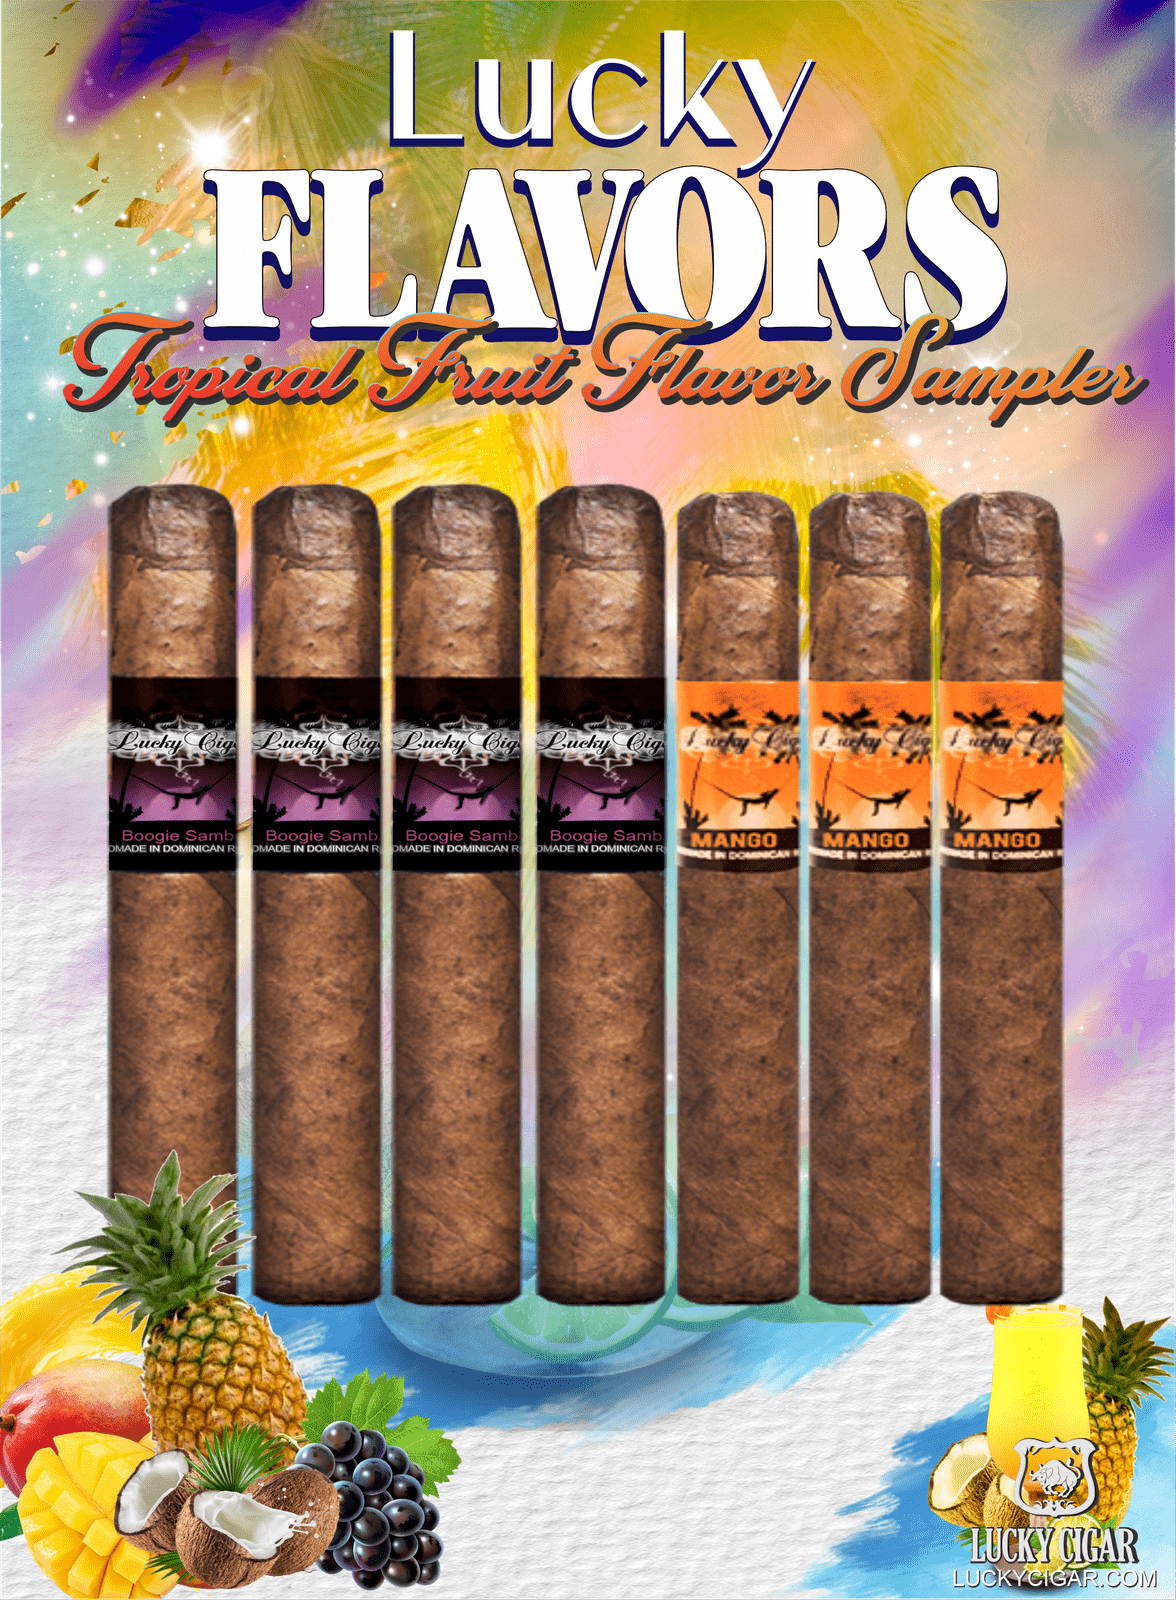 Flavored Cigars: Lucky Flavors 7 Piece Tropical Fruit Sampler - Boogie, Mango